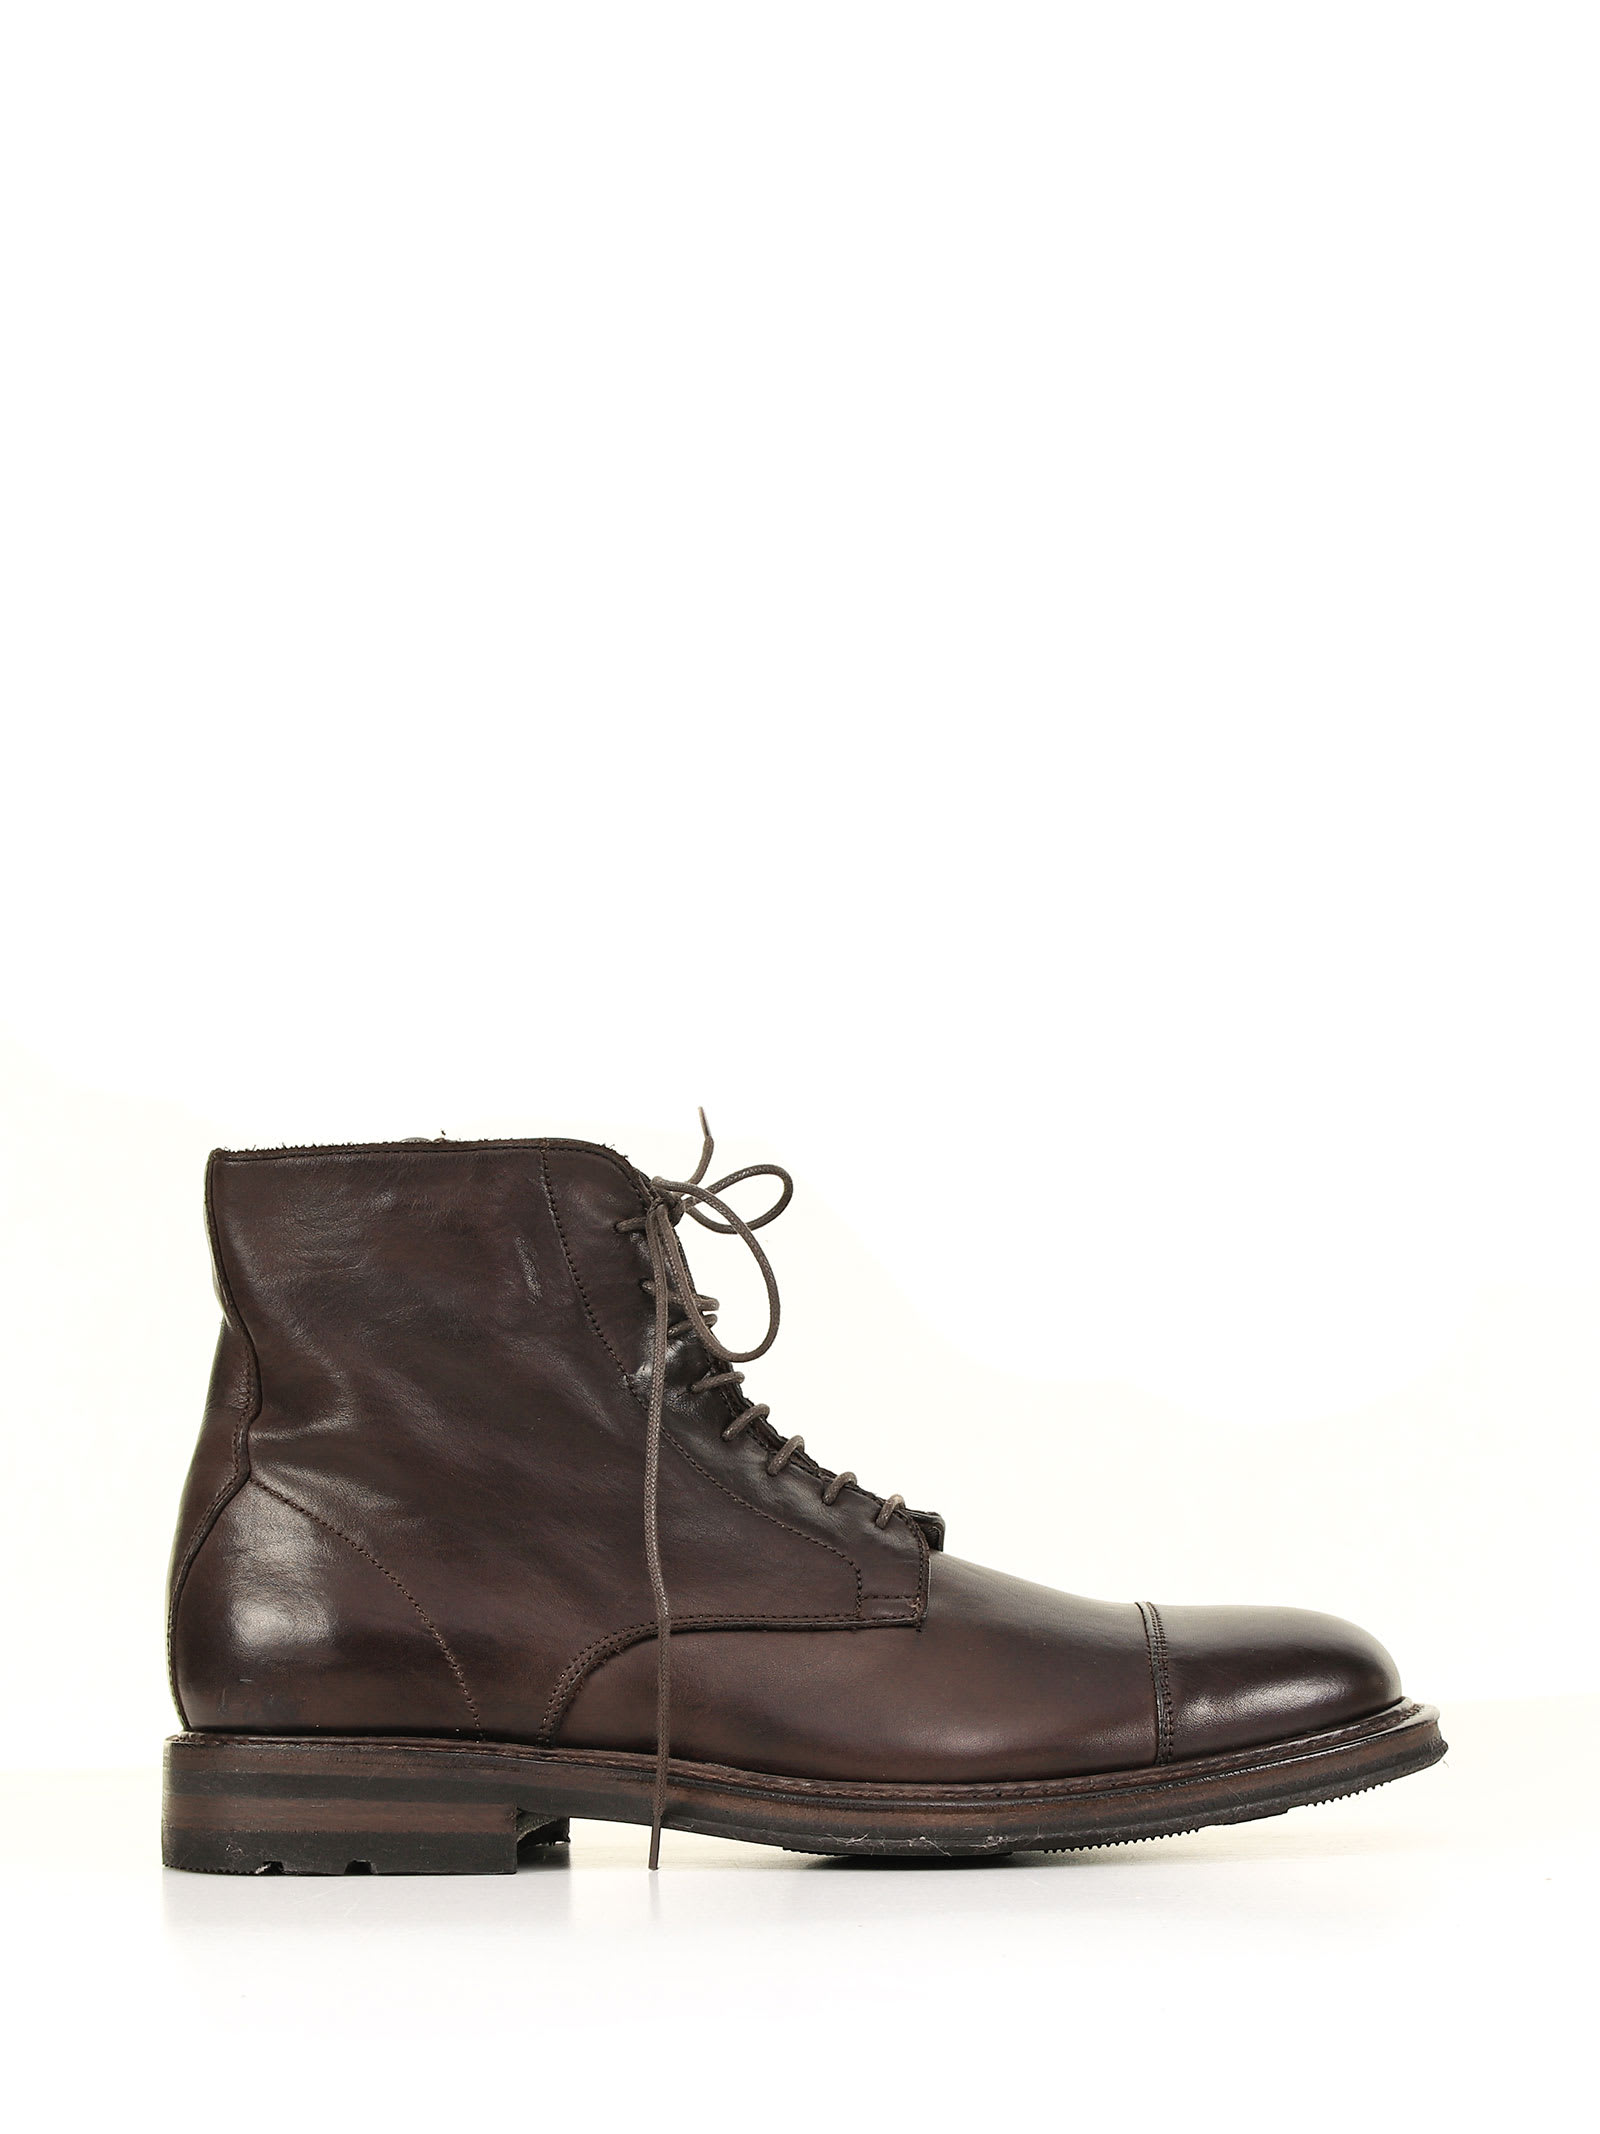 Fratelli Rossetti Leather Ankle Boot